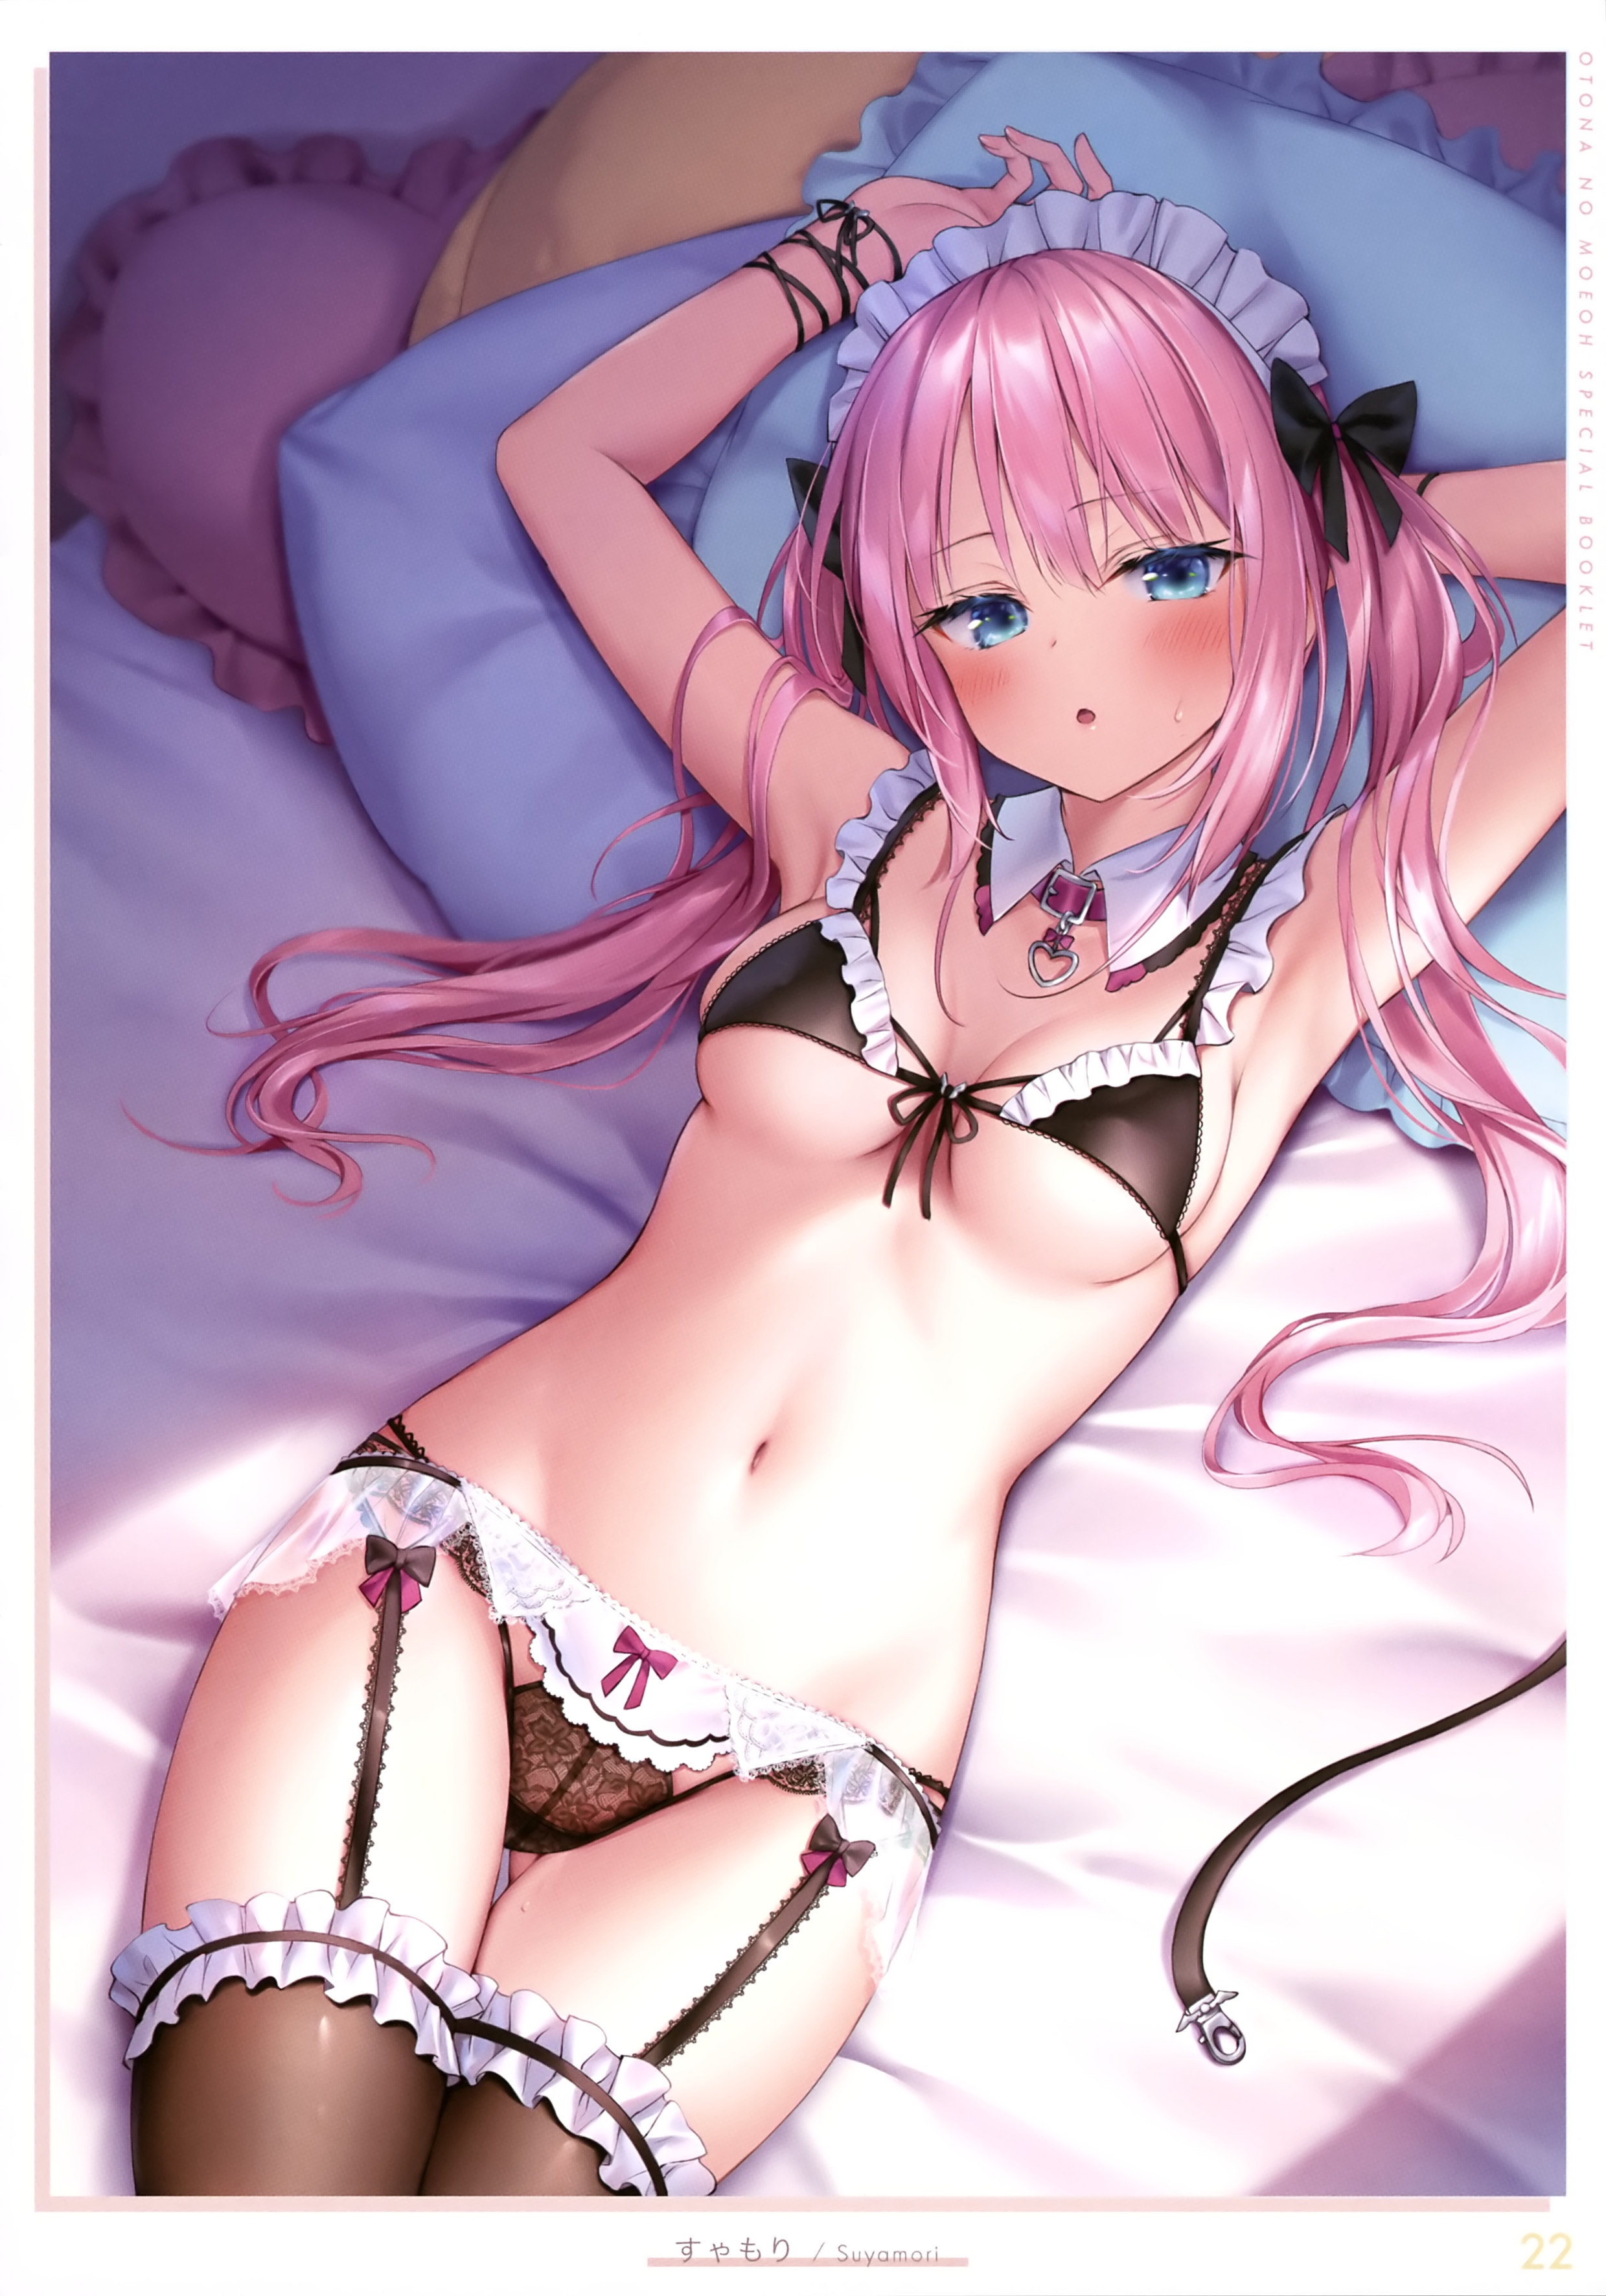 Anime 2479x3543 anime anime girls digital art artwork 2D portrait display belly lingerie pink hair blue eyes lying down in bed panties black lingerie indoors maid bikini Suyamori underboob twintails blushing maid outfit